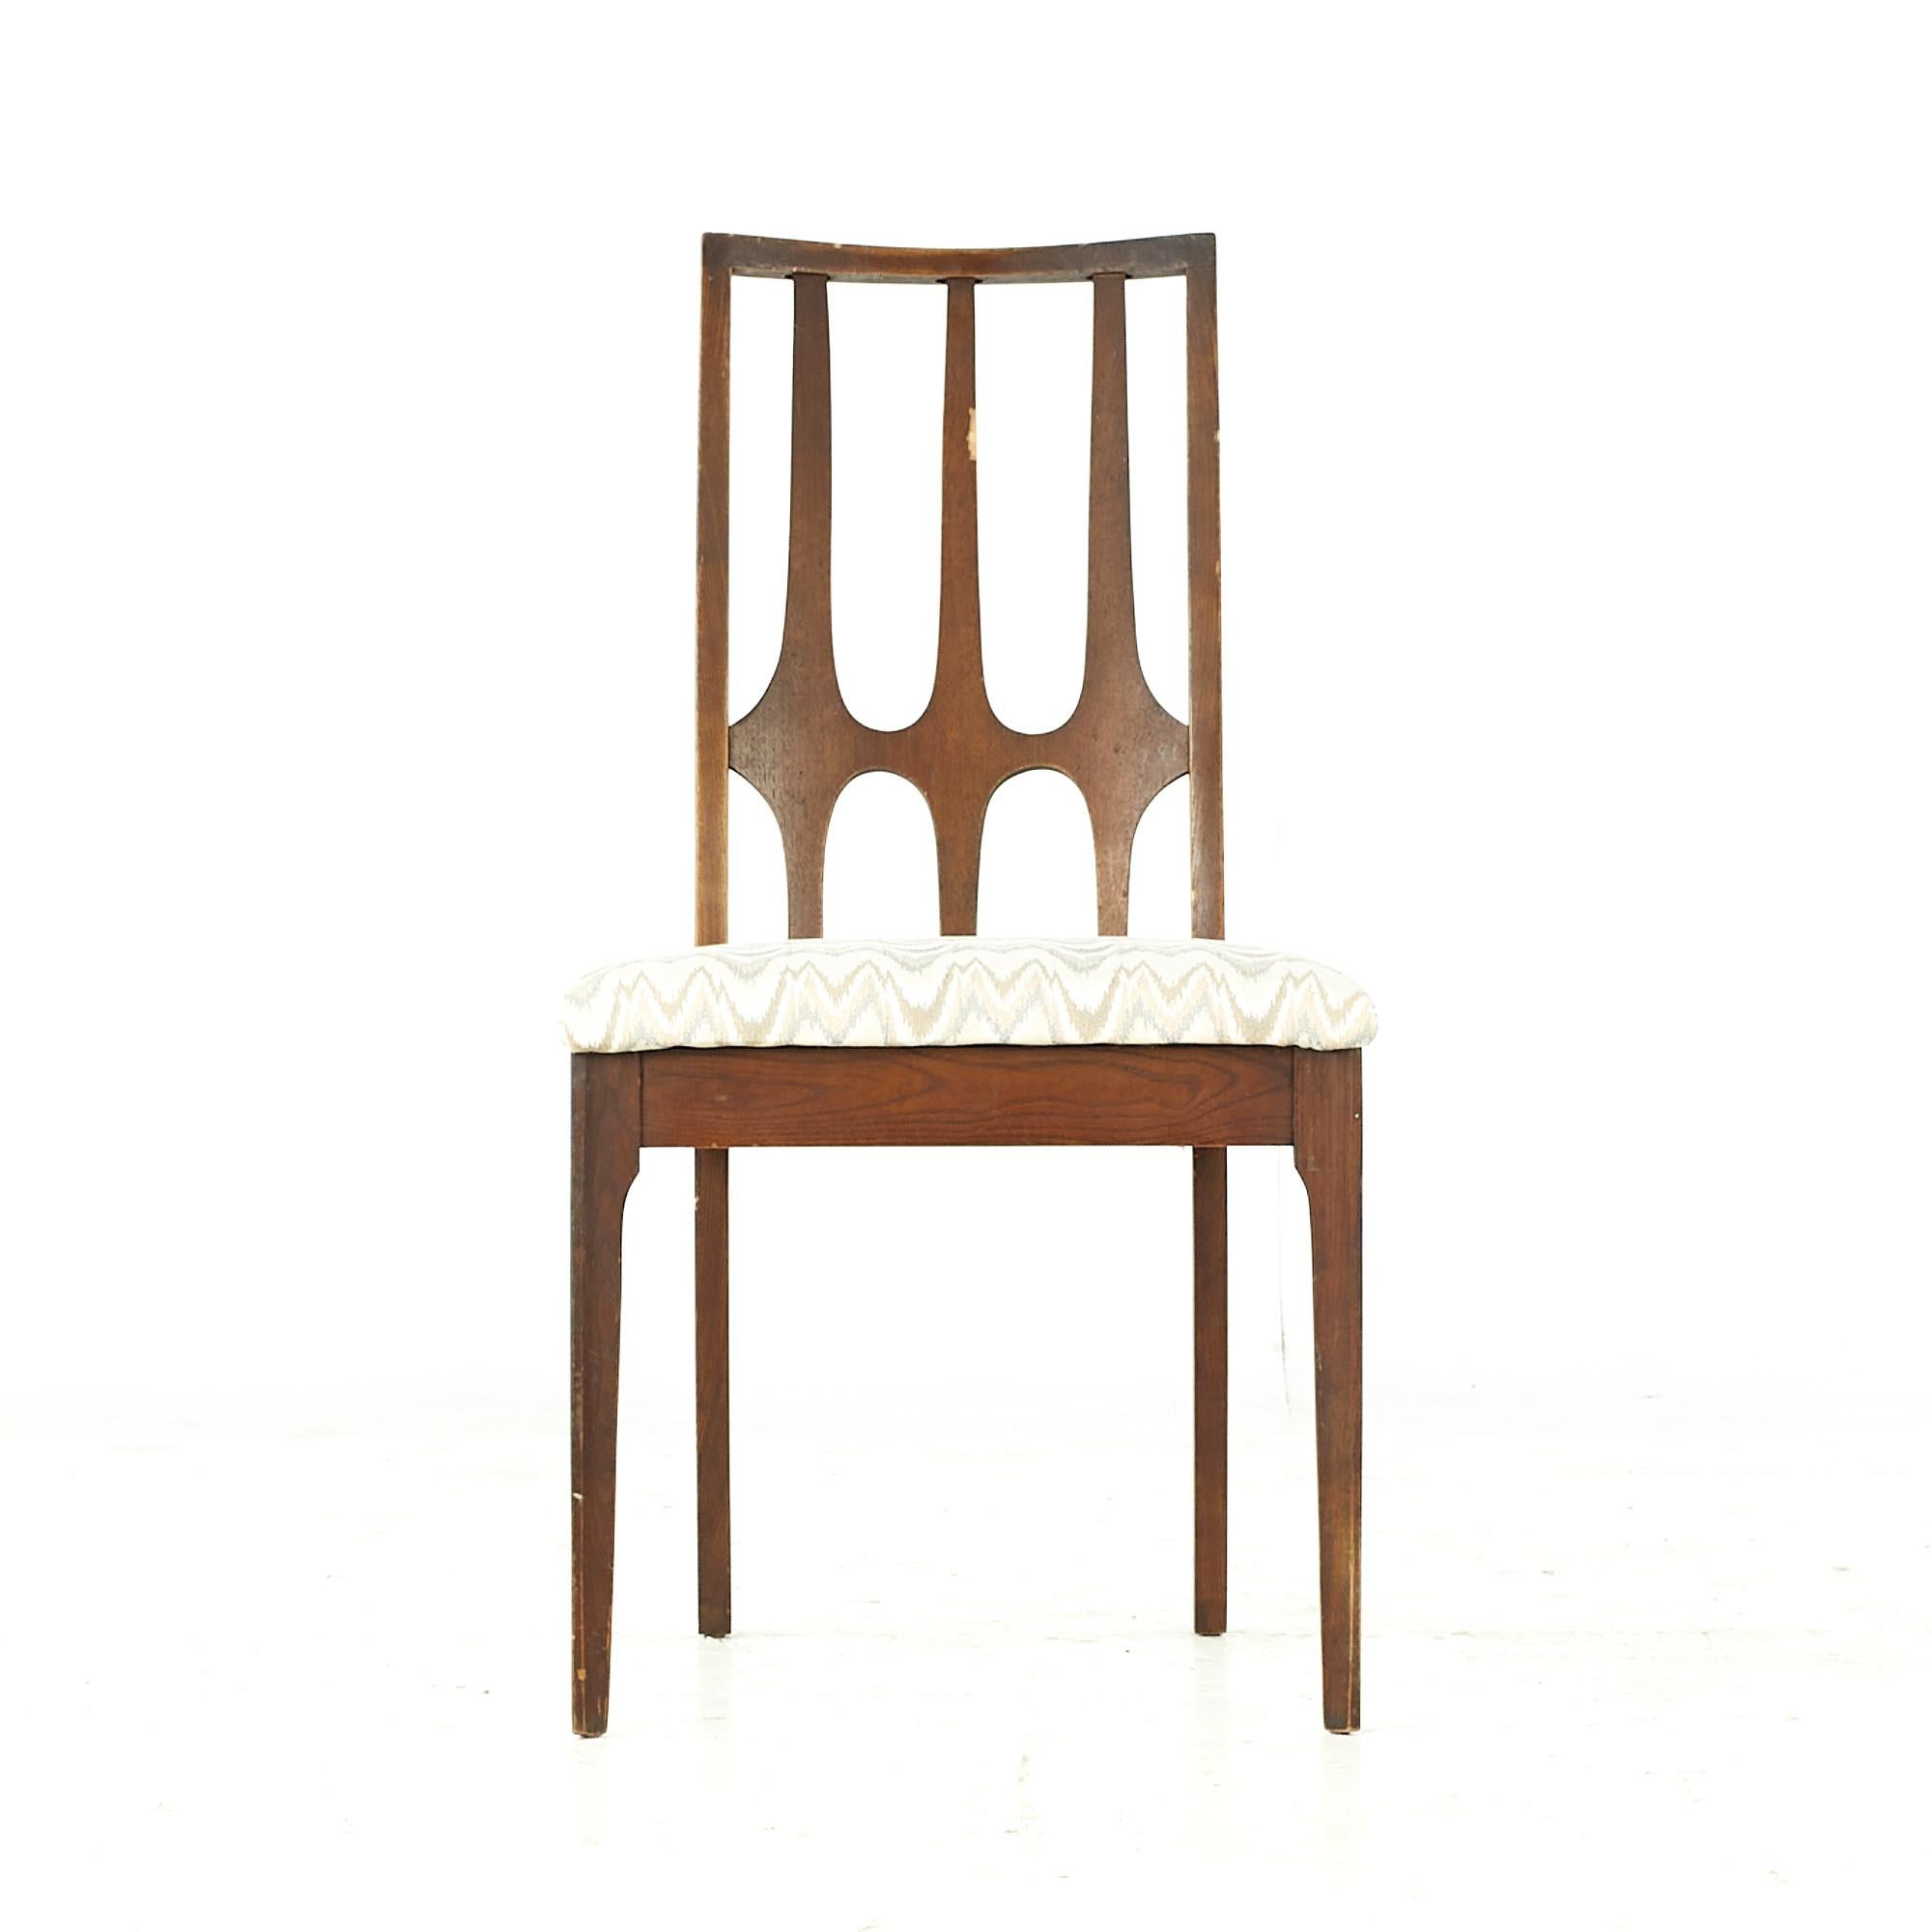 Broyhill Brasilia Midcentury Walnut Dining Chairs, Set of 6 In Good Condition For Sale In Countryside, IL